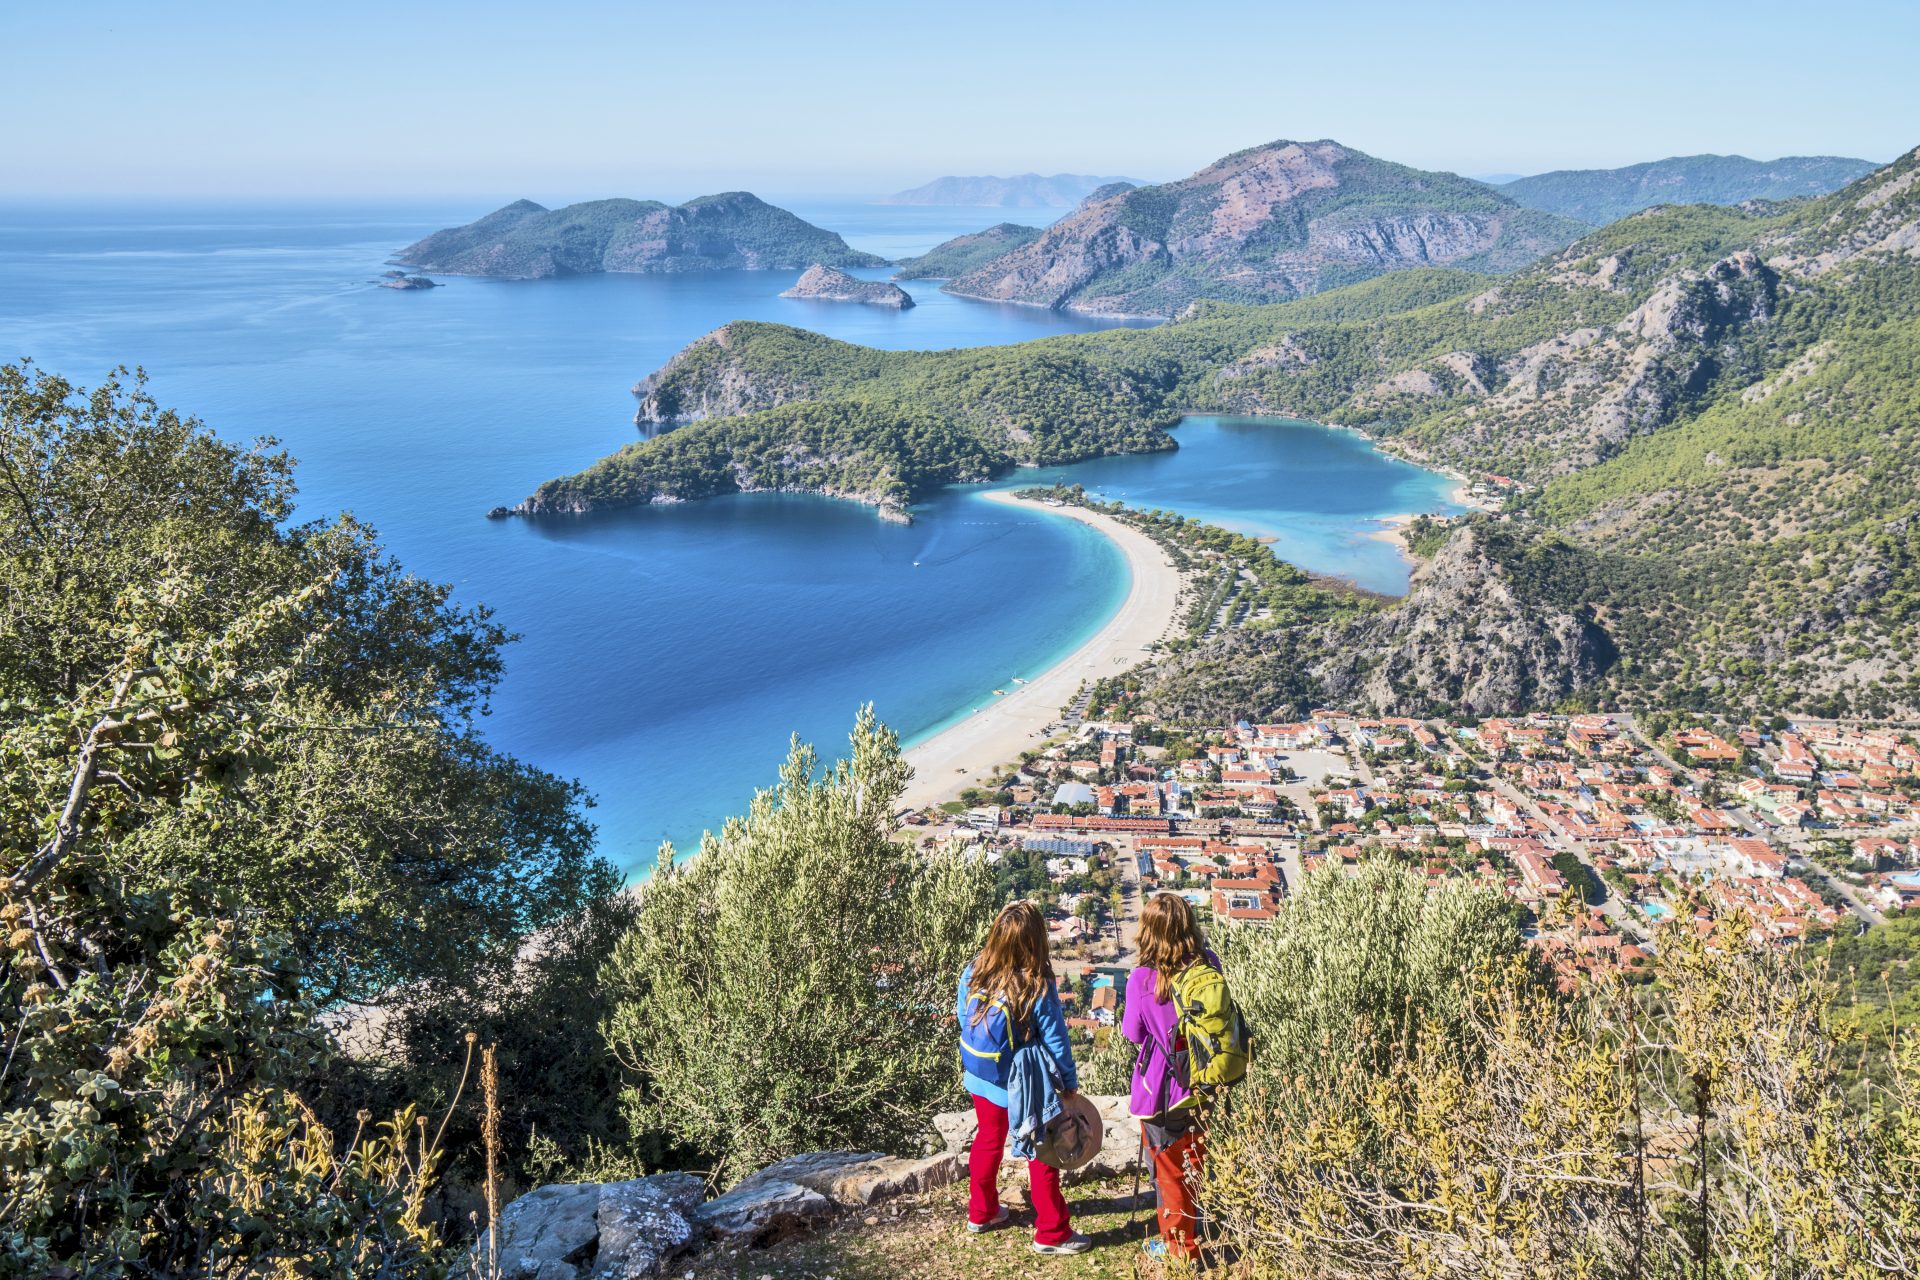 The Lycian Way Hiking Trail